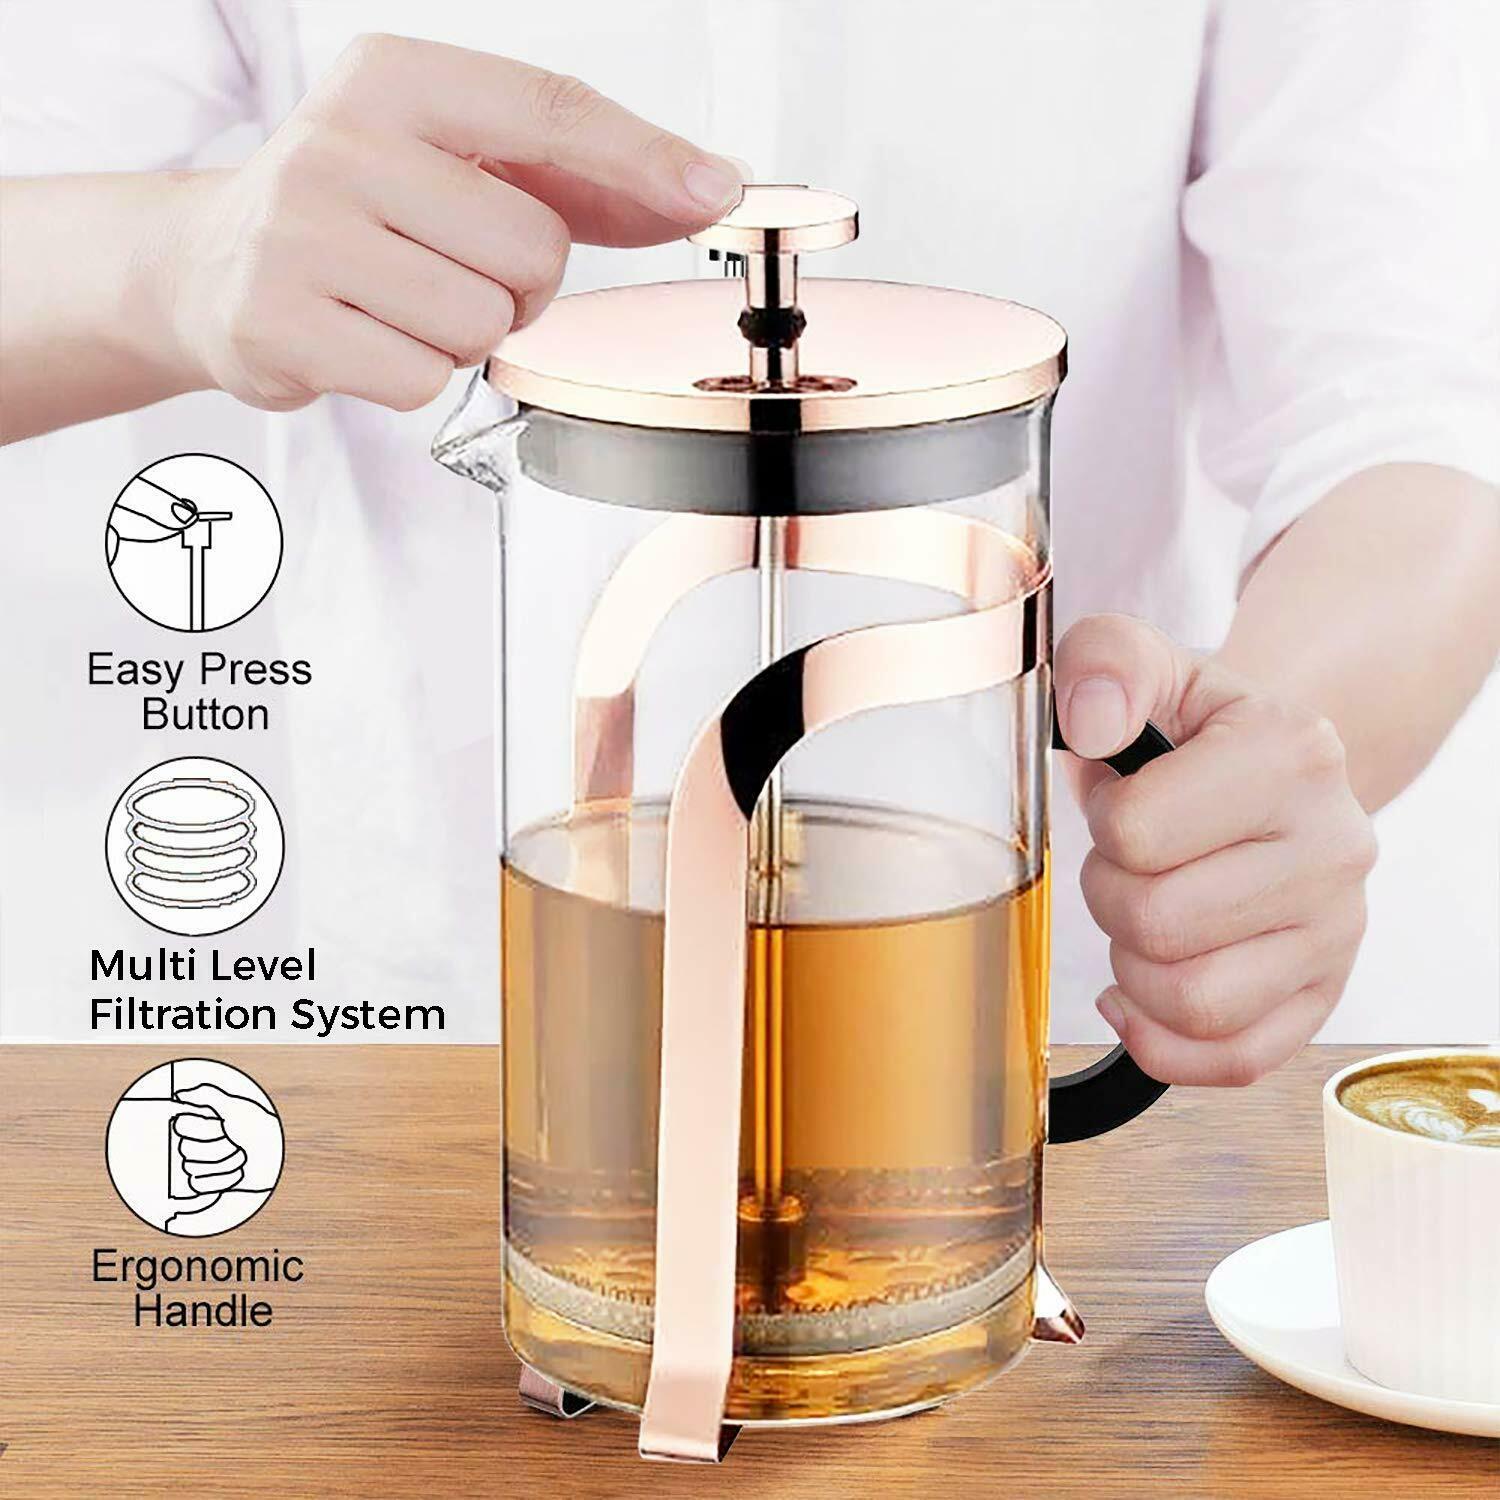 CLASSIC CAFETIERE 600ML GROUND COFFEE FRENCH PRESS GLASS POT PLUNGER CUP MUG 